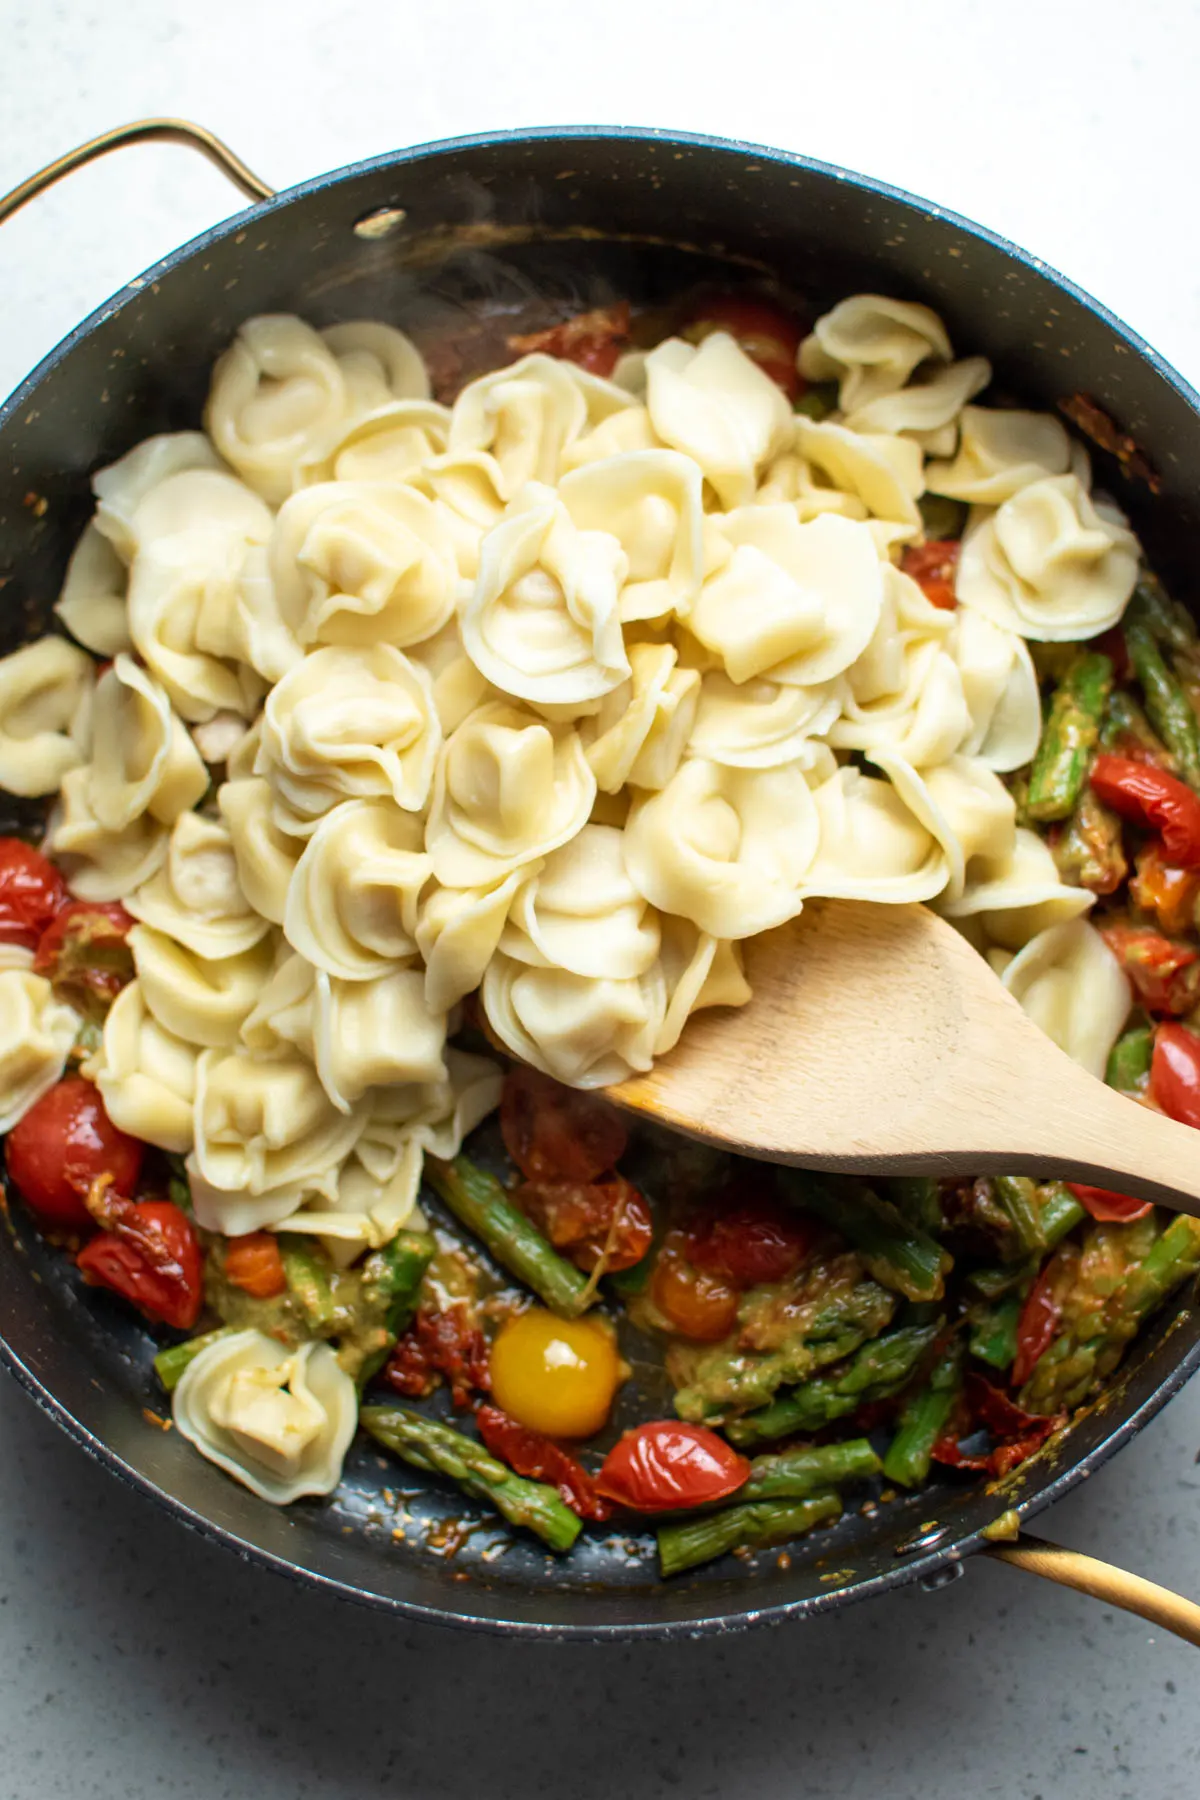 Cooked tortellini in large black skillet with tomatoes and asparagus.